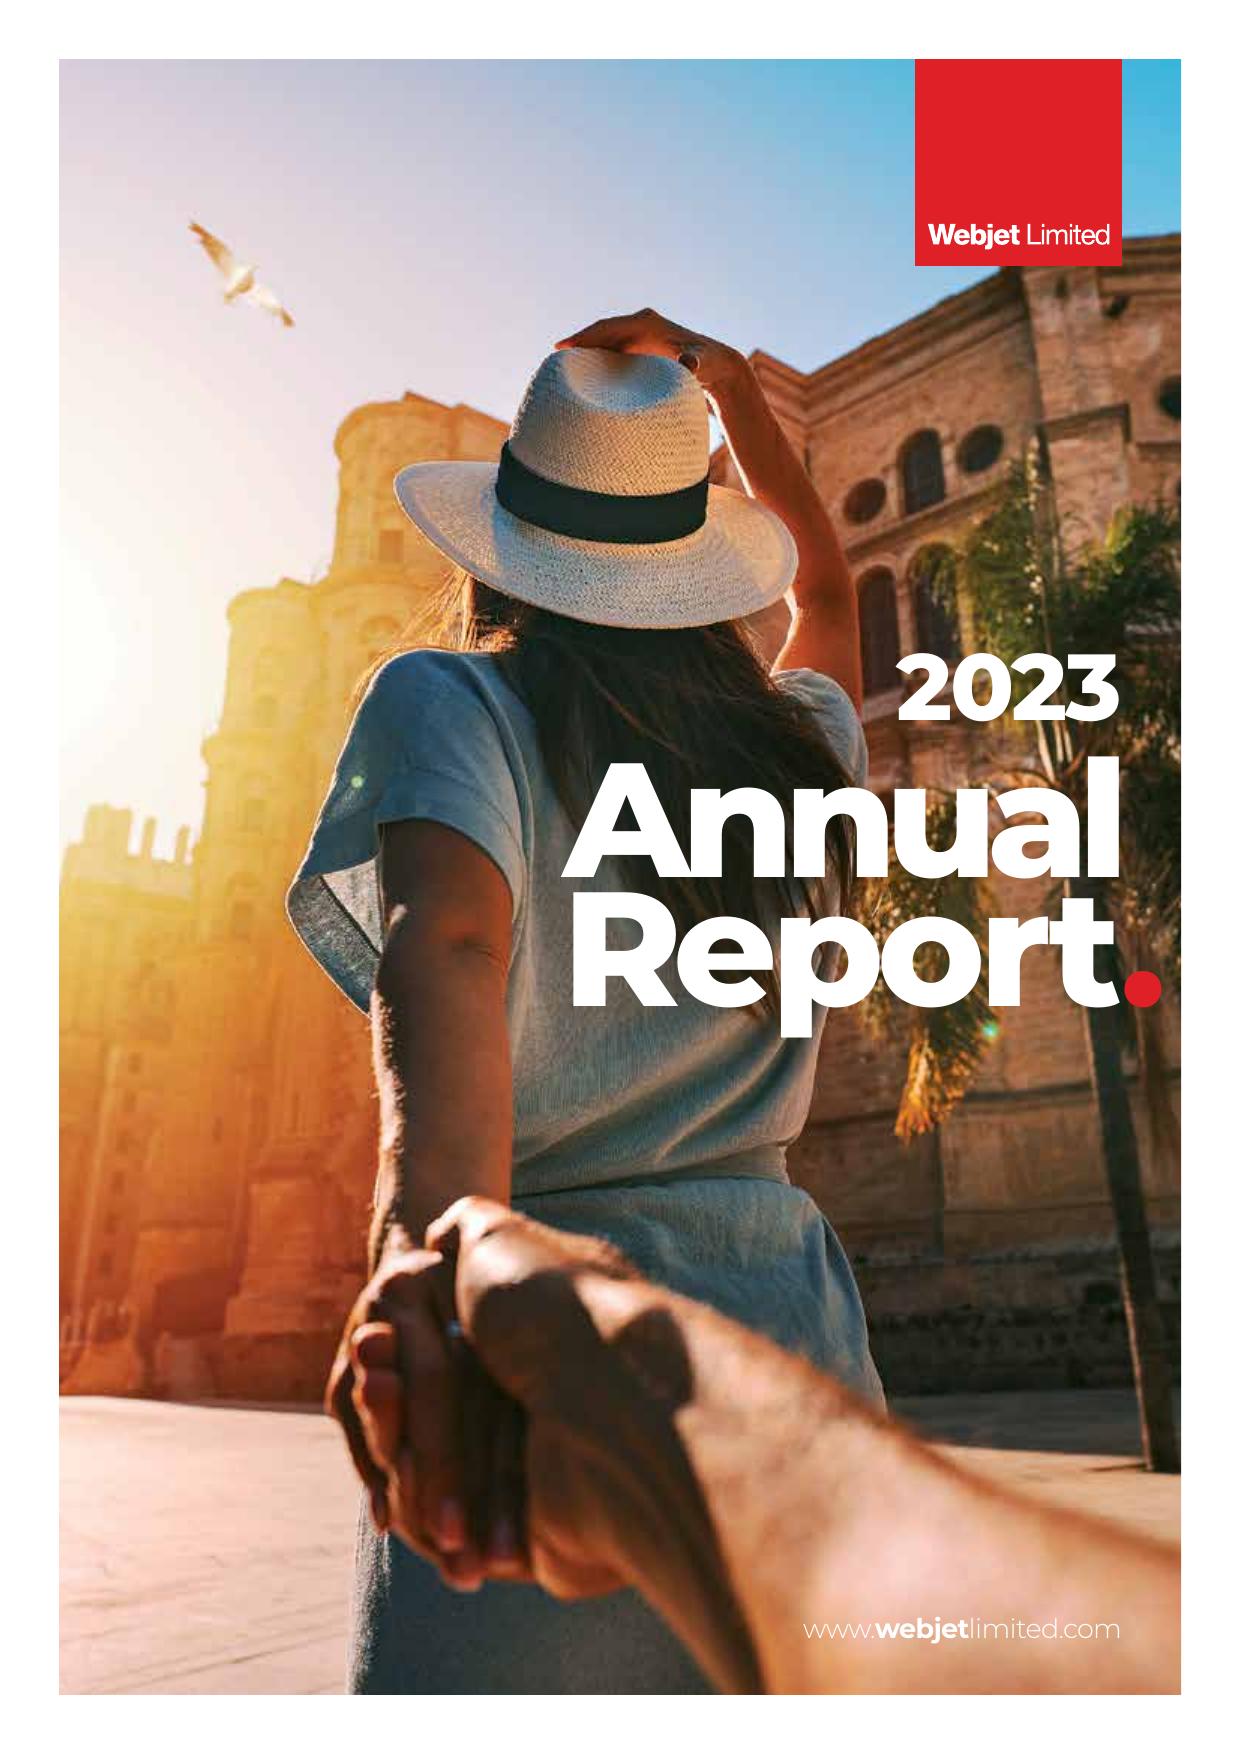 FAMOUSBRANDS 2023 Annual Report